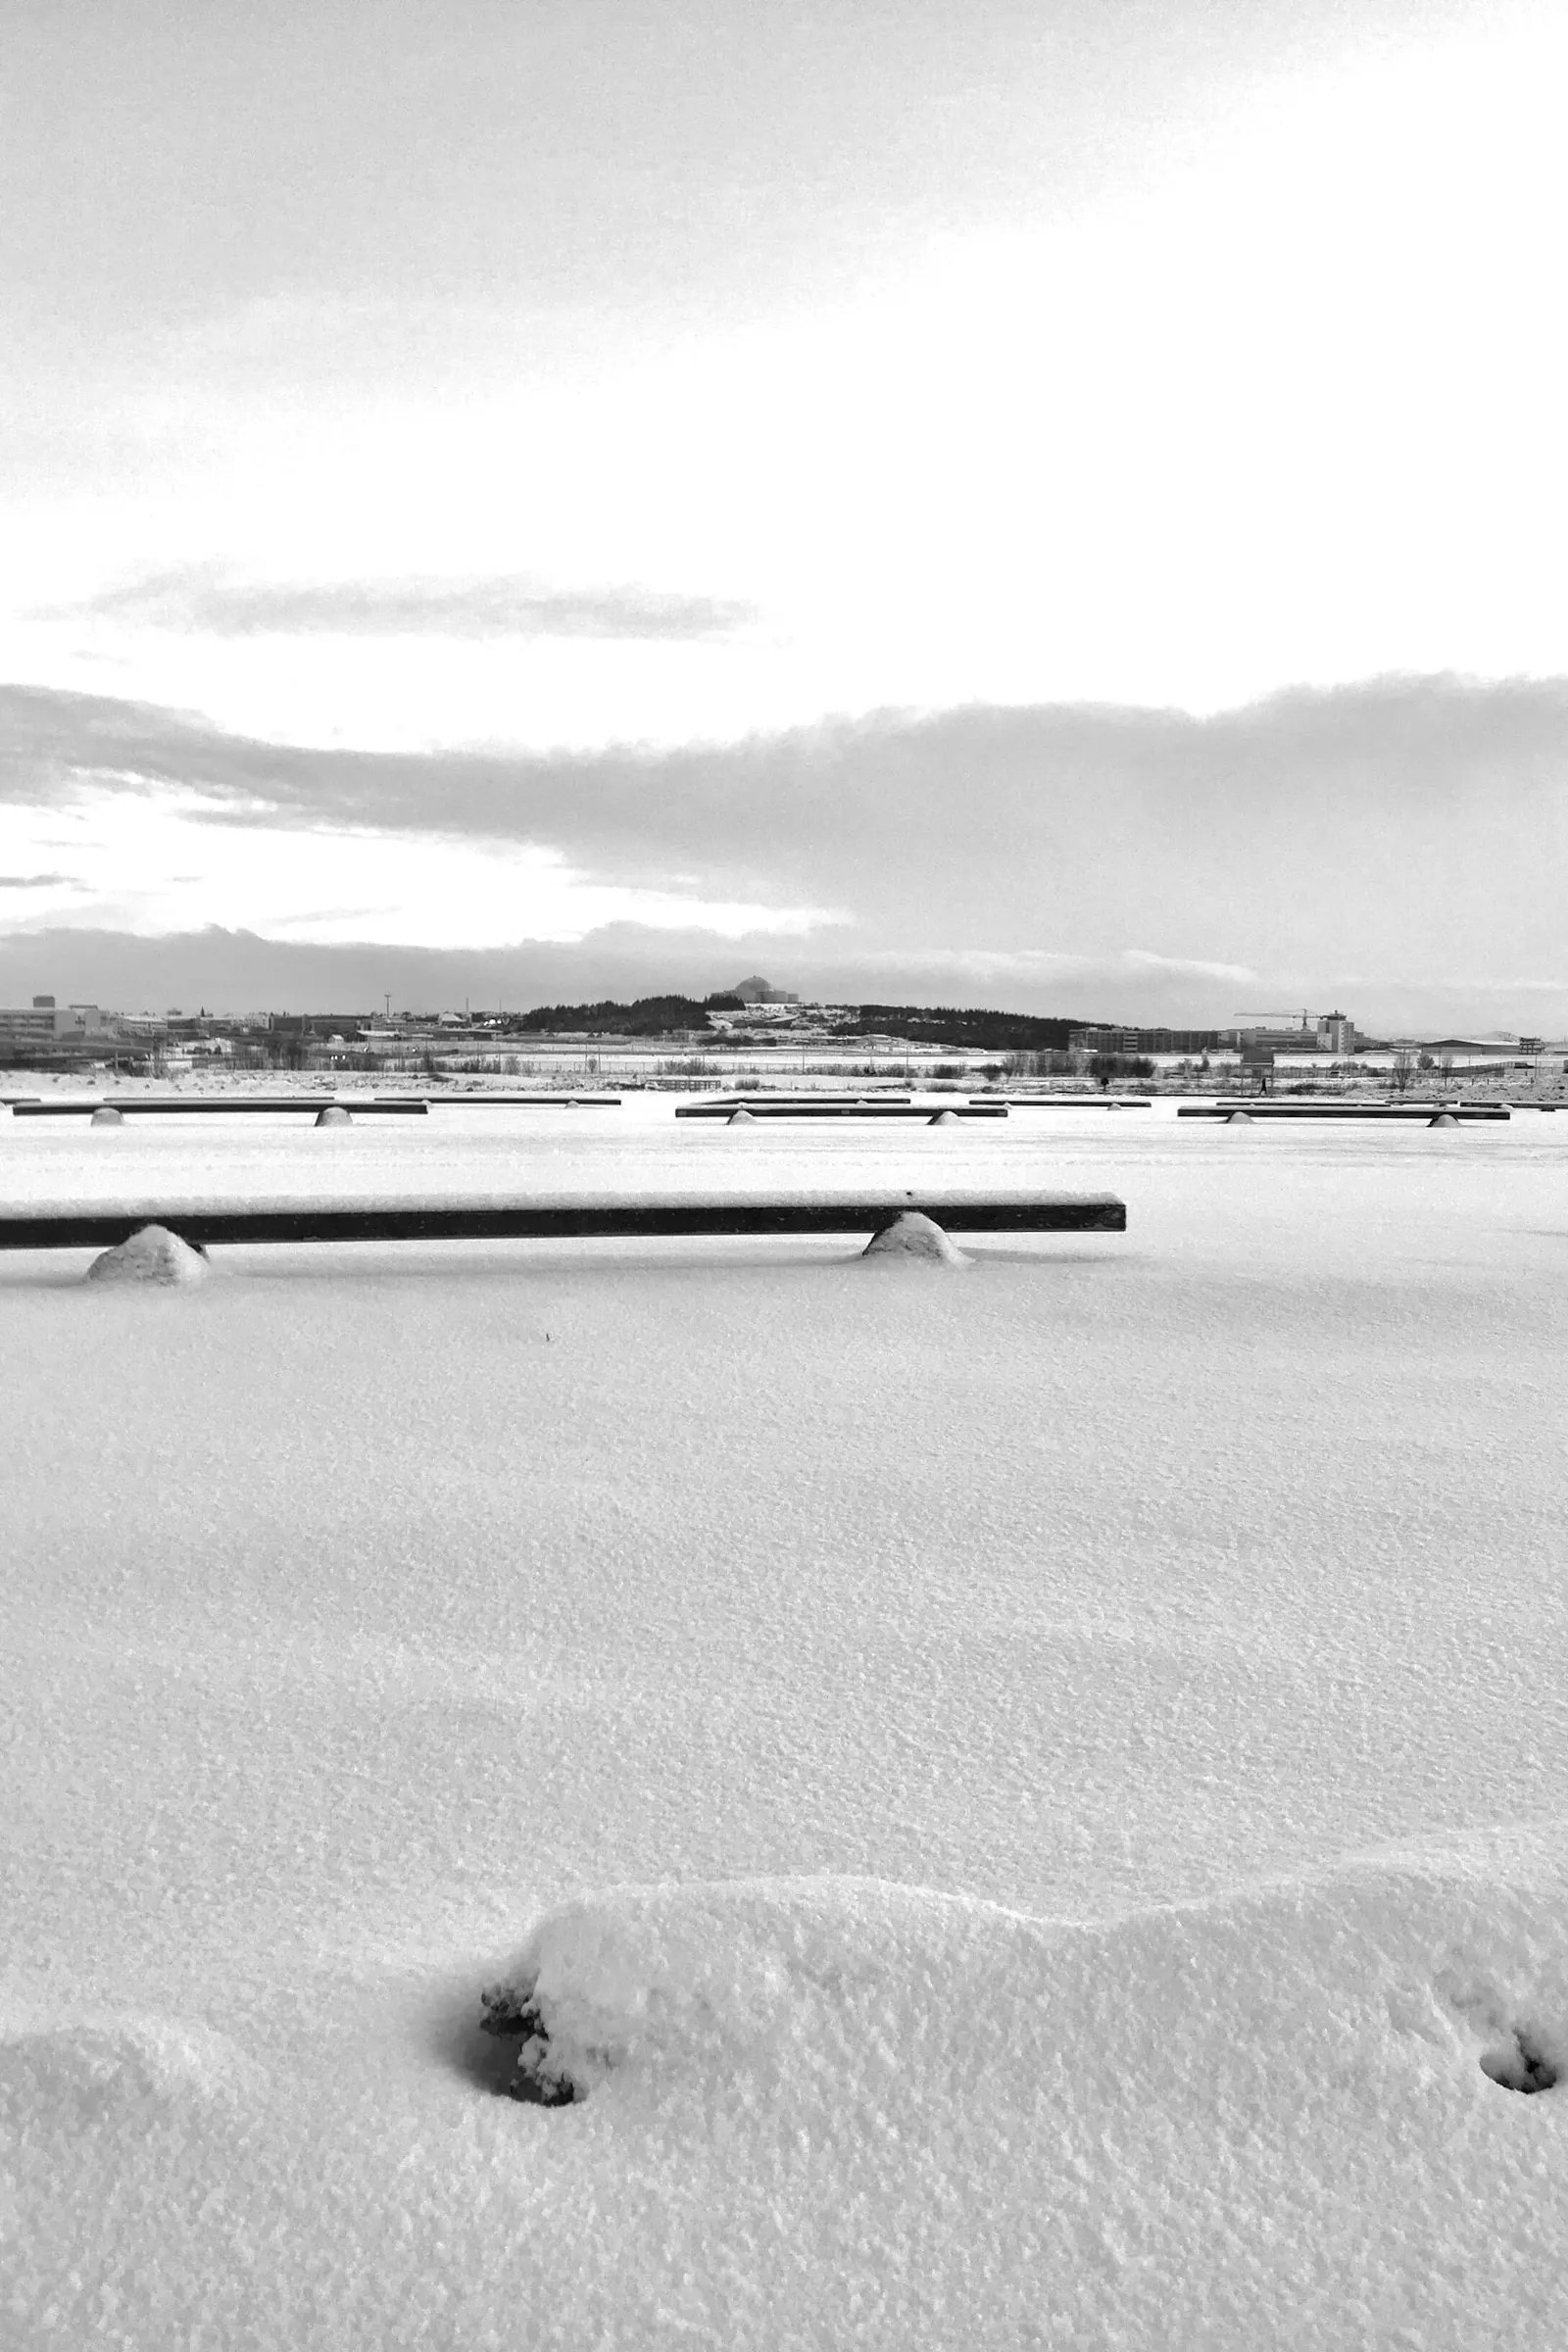 Snowy Reykjavík. In the distance you see the Pearl